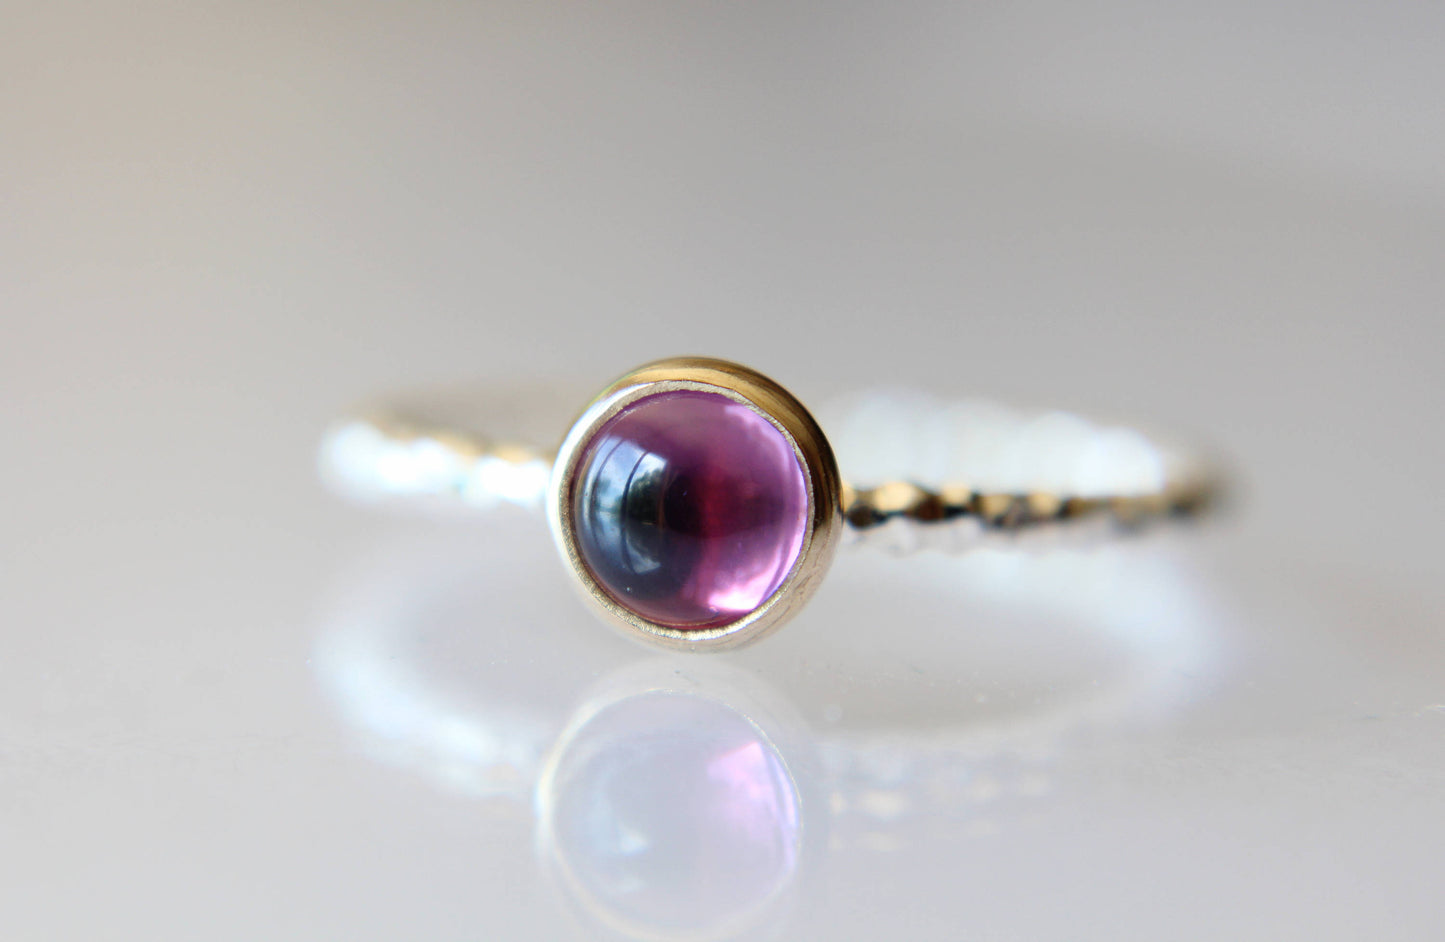 Amethyst Ring, Stacking Ring, Gemstone Ring, Cocktail Ring, Amethyst, Amethyst Engagement Ring, Amethyst Jewelry, Gold And Silver, 5mm